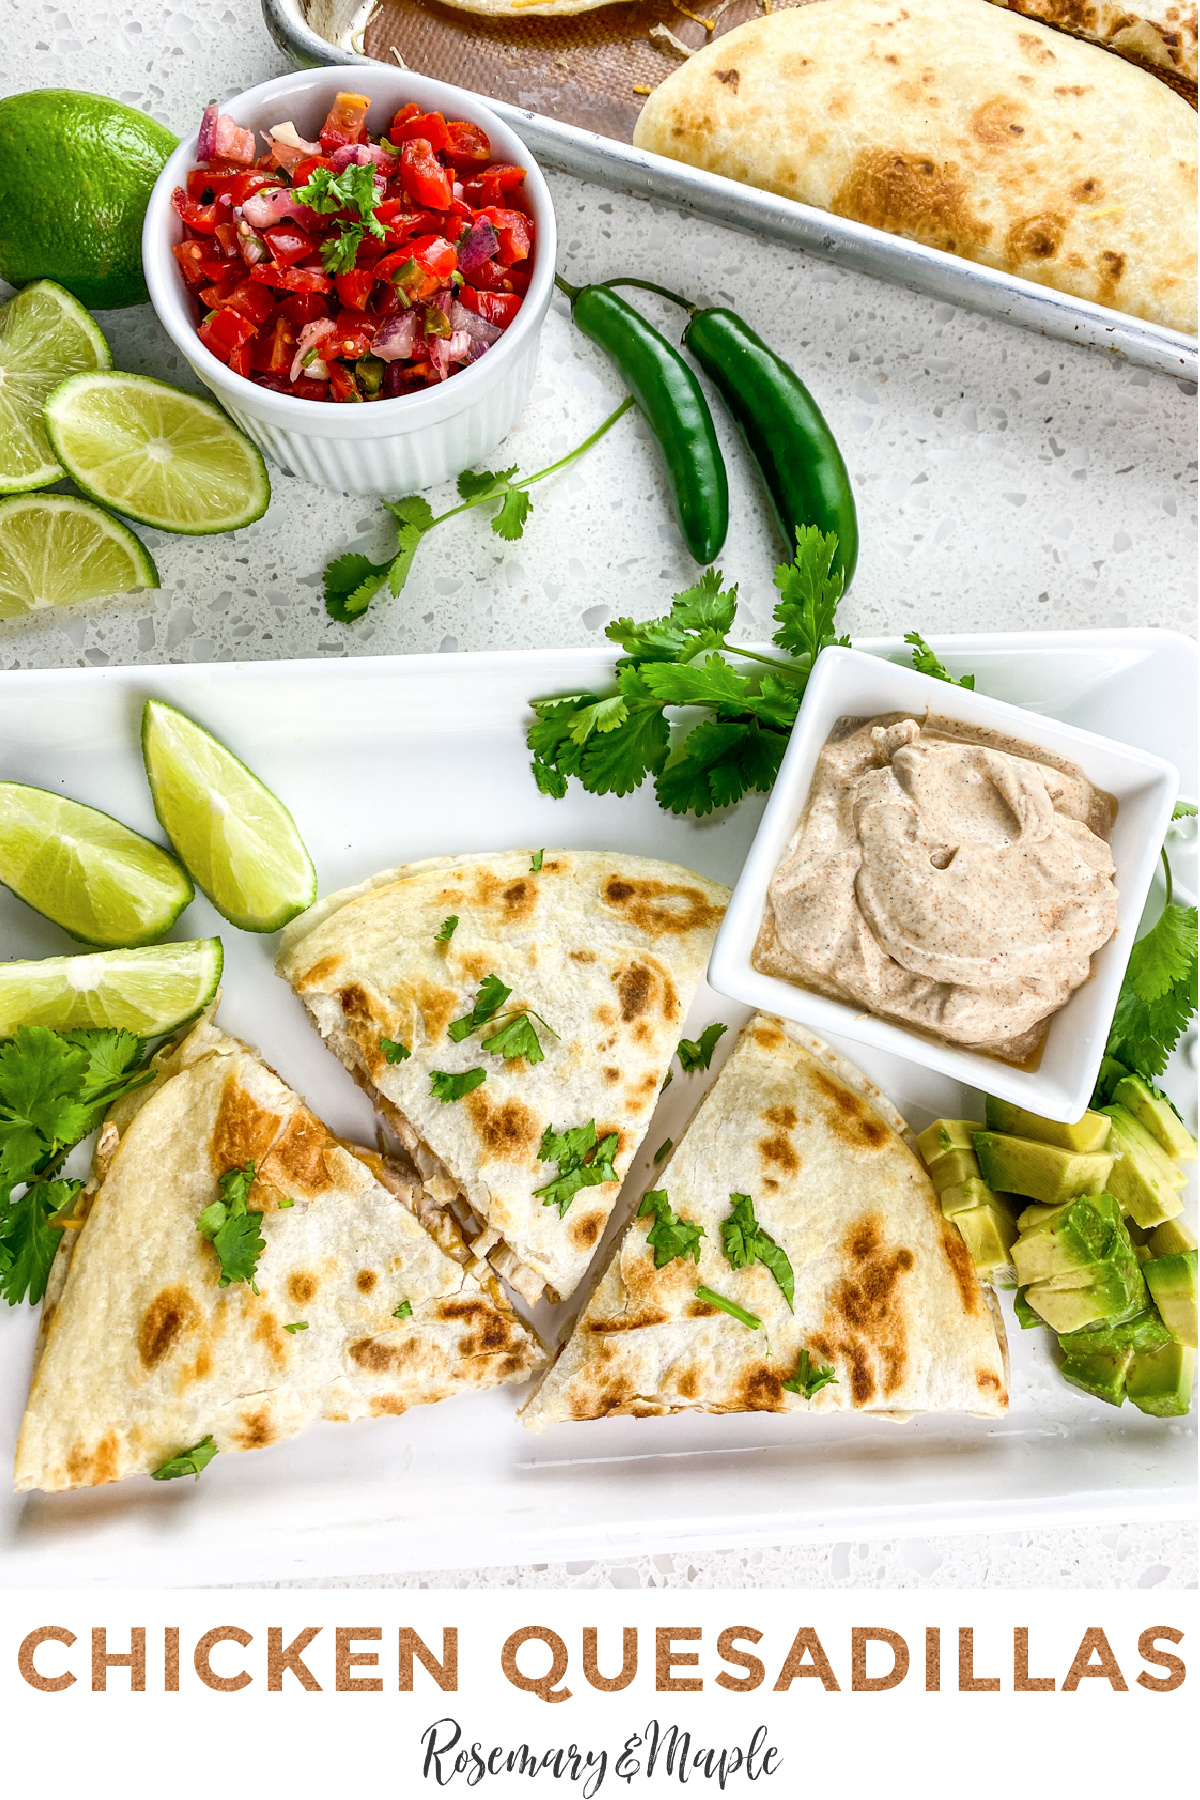 Chicken quesadillas are an easy, satisfying meal the whole family will love. This chicken quesadilla recipe makes a quick weeknight dinner.